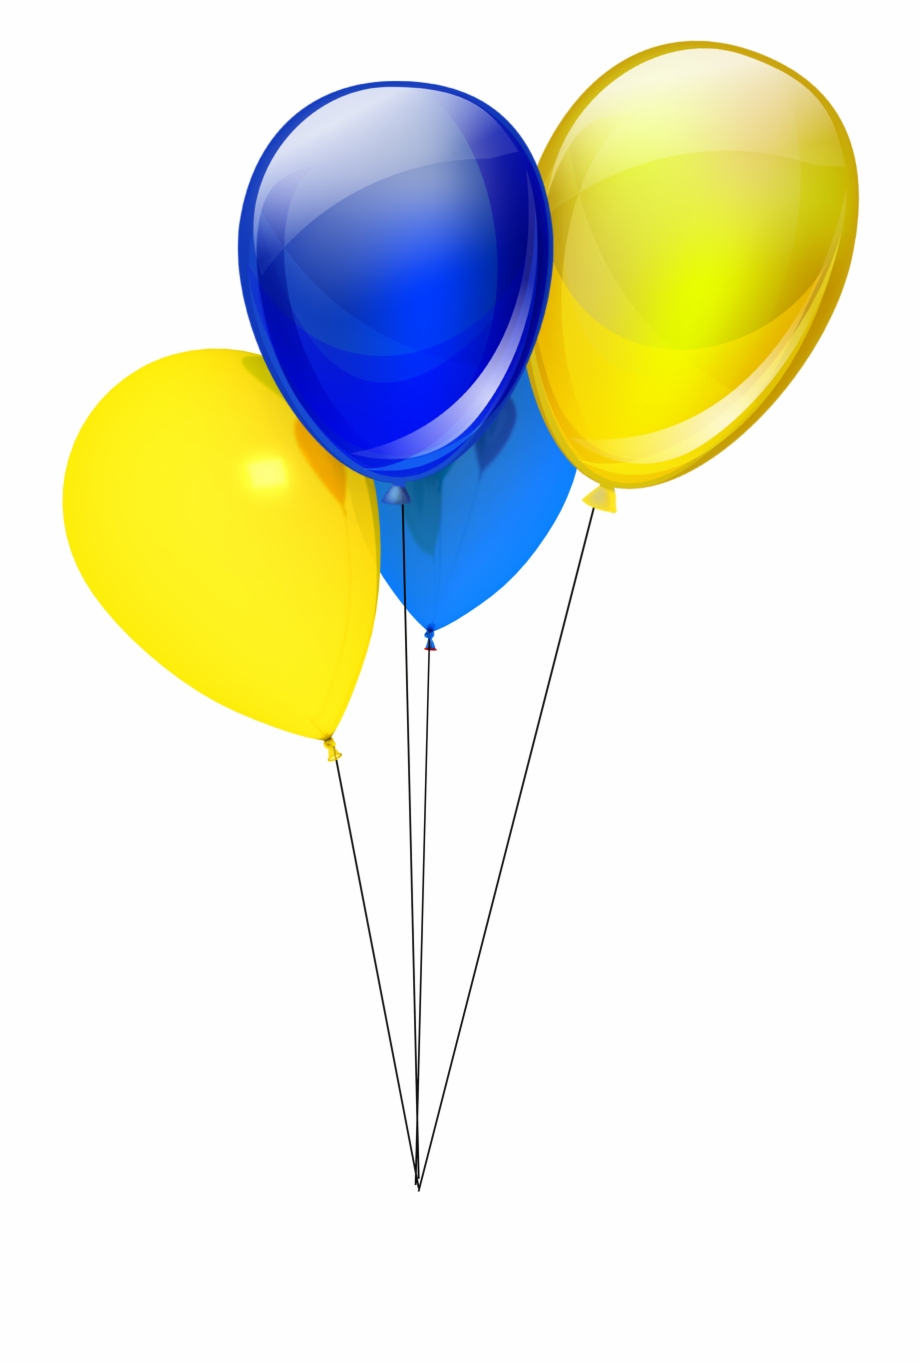 Contact Blue And Gold Balloons Png